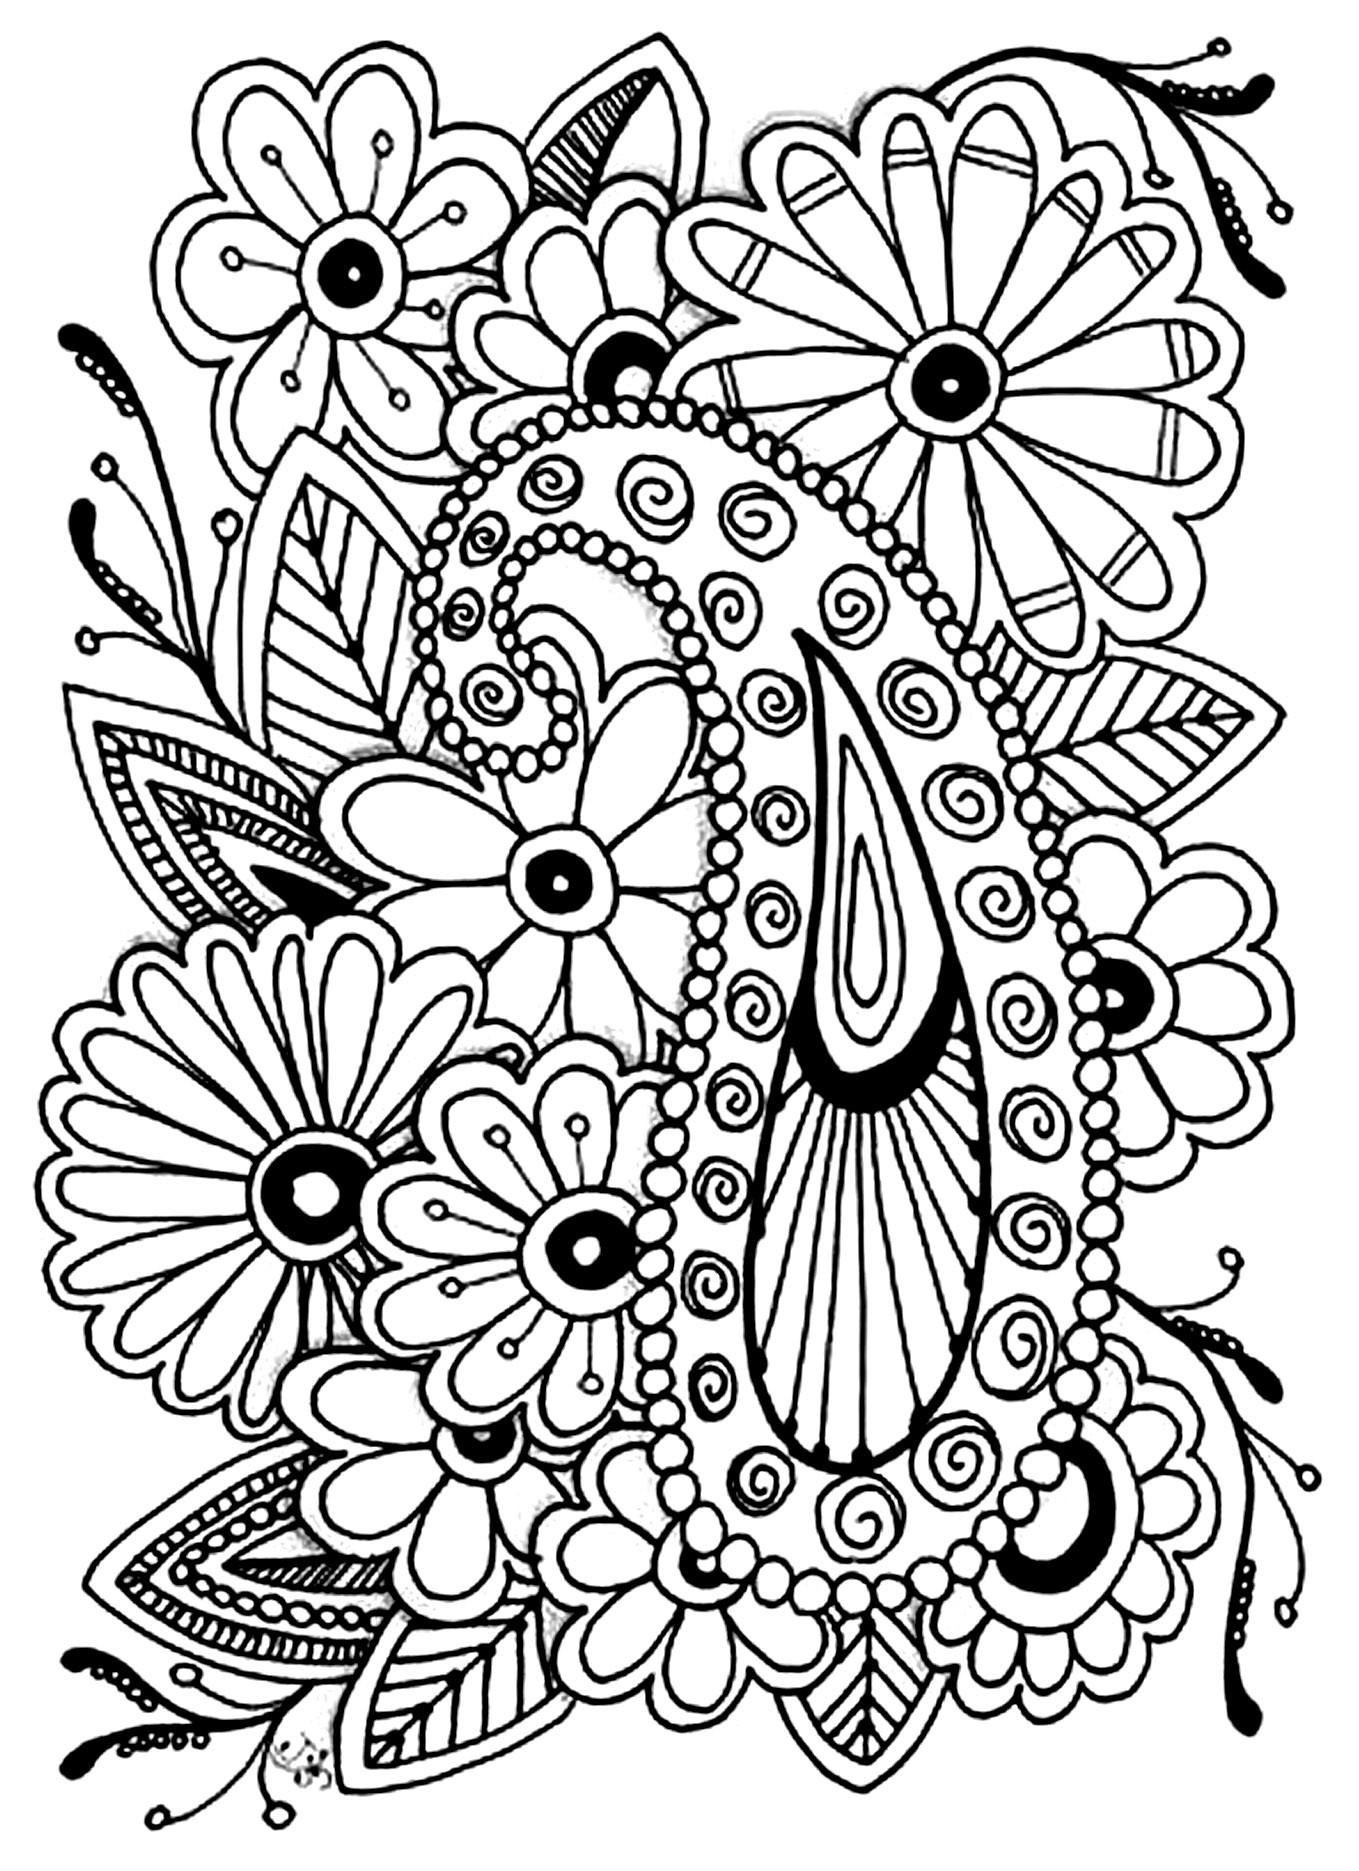 Adult Coloring Pages Patterns Flowers
 Flowers paisley Flowers Adult Coloring Pages